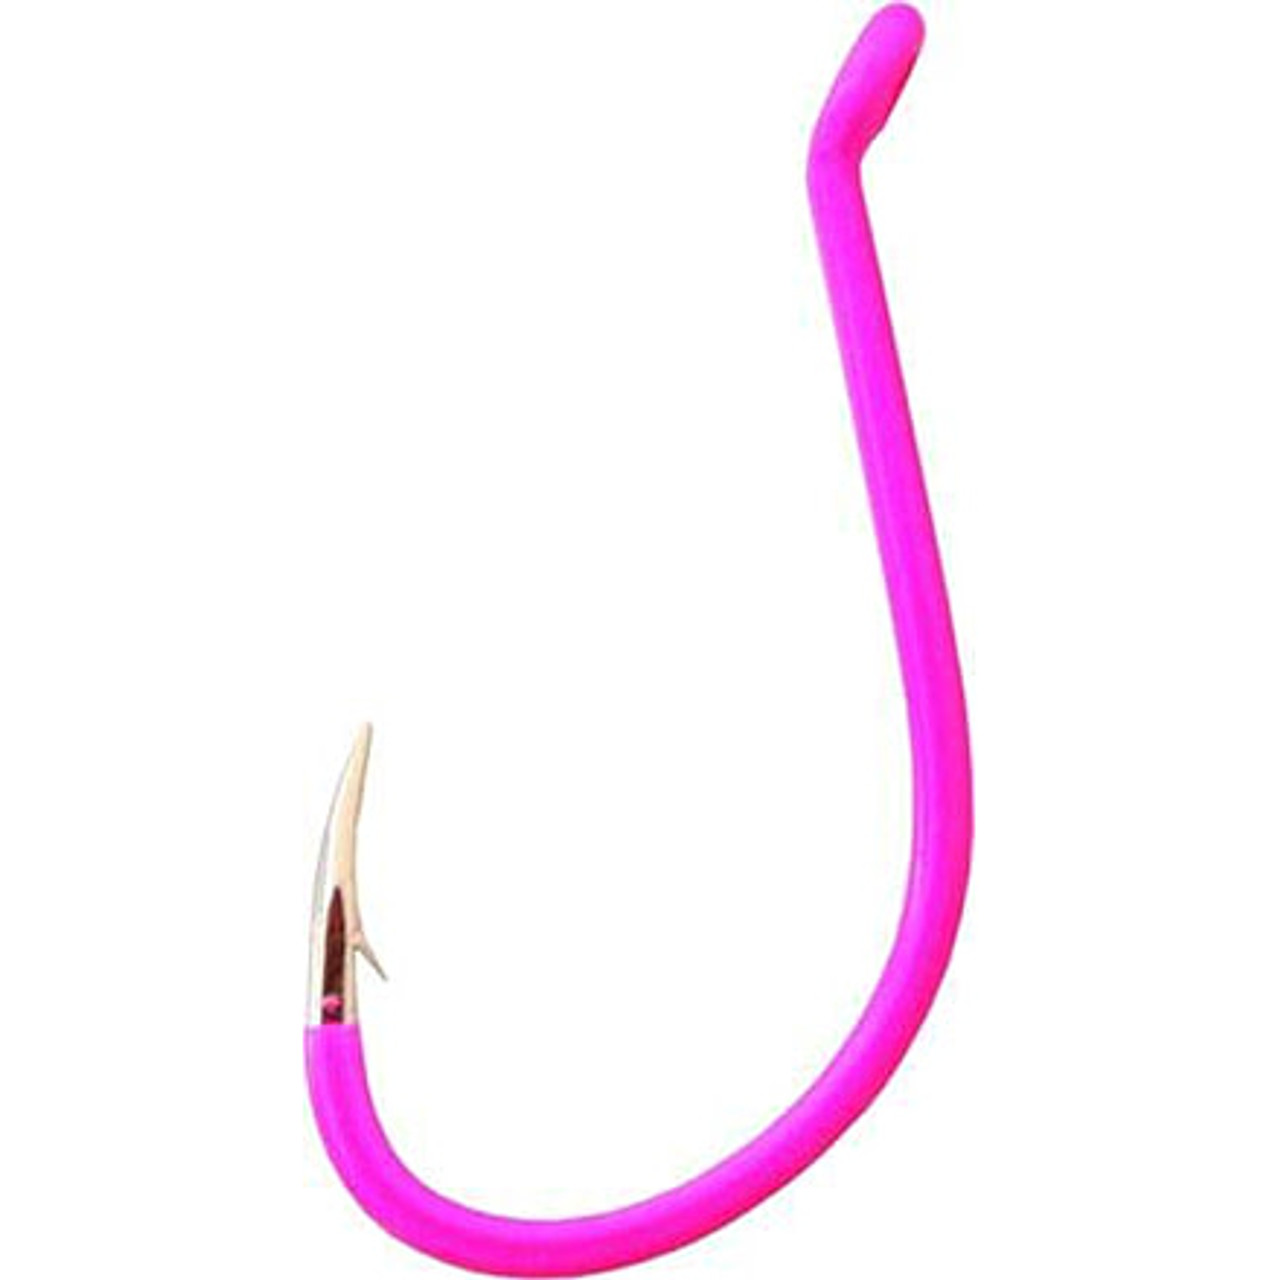 Gamakatsu Octopus Hook, Size 8, Barbed, Needle Point, Ringed Eye,  Fluorescent Pink, 7 per Pack